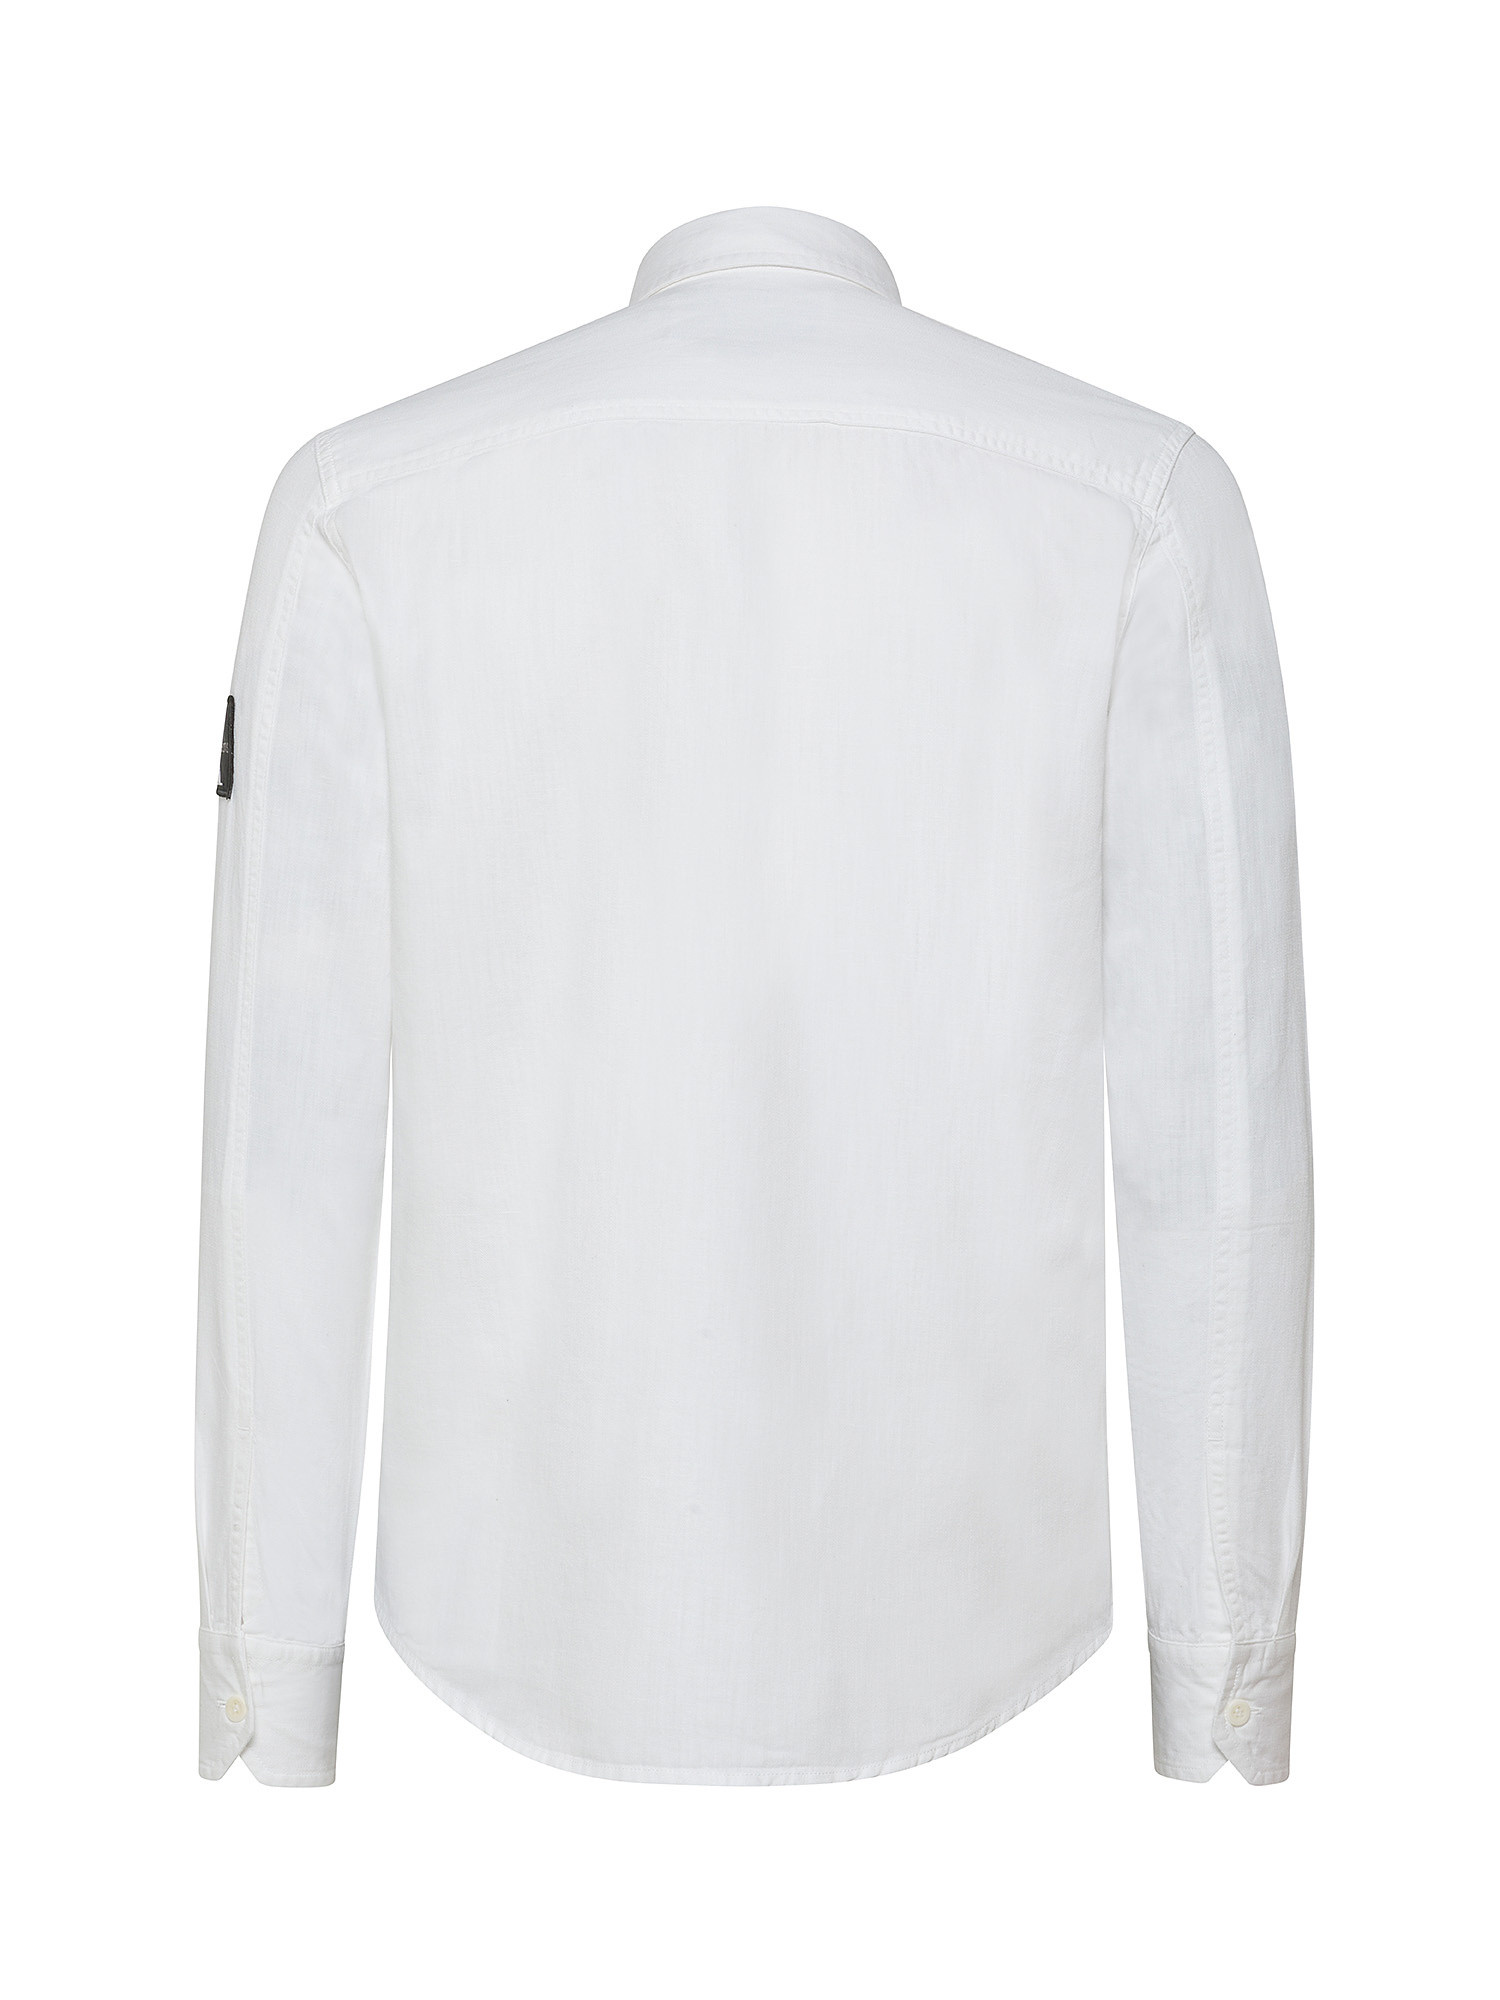 Calvin Klein Jeans - Shirt with double pocket, White, large image number 1